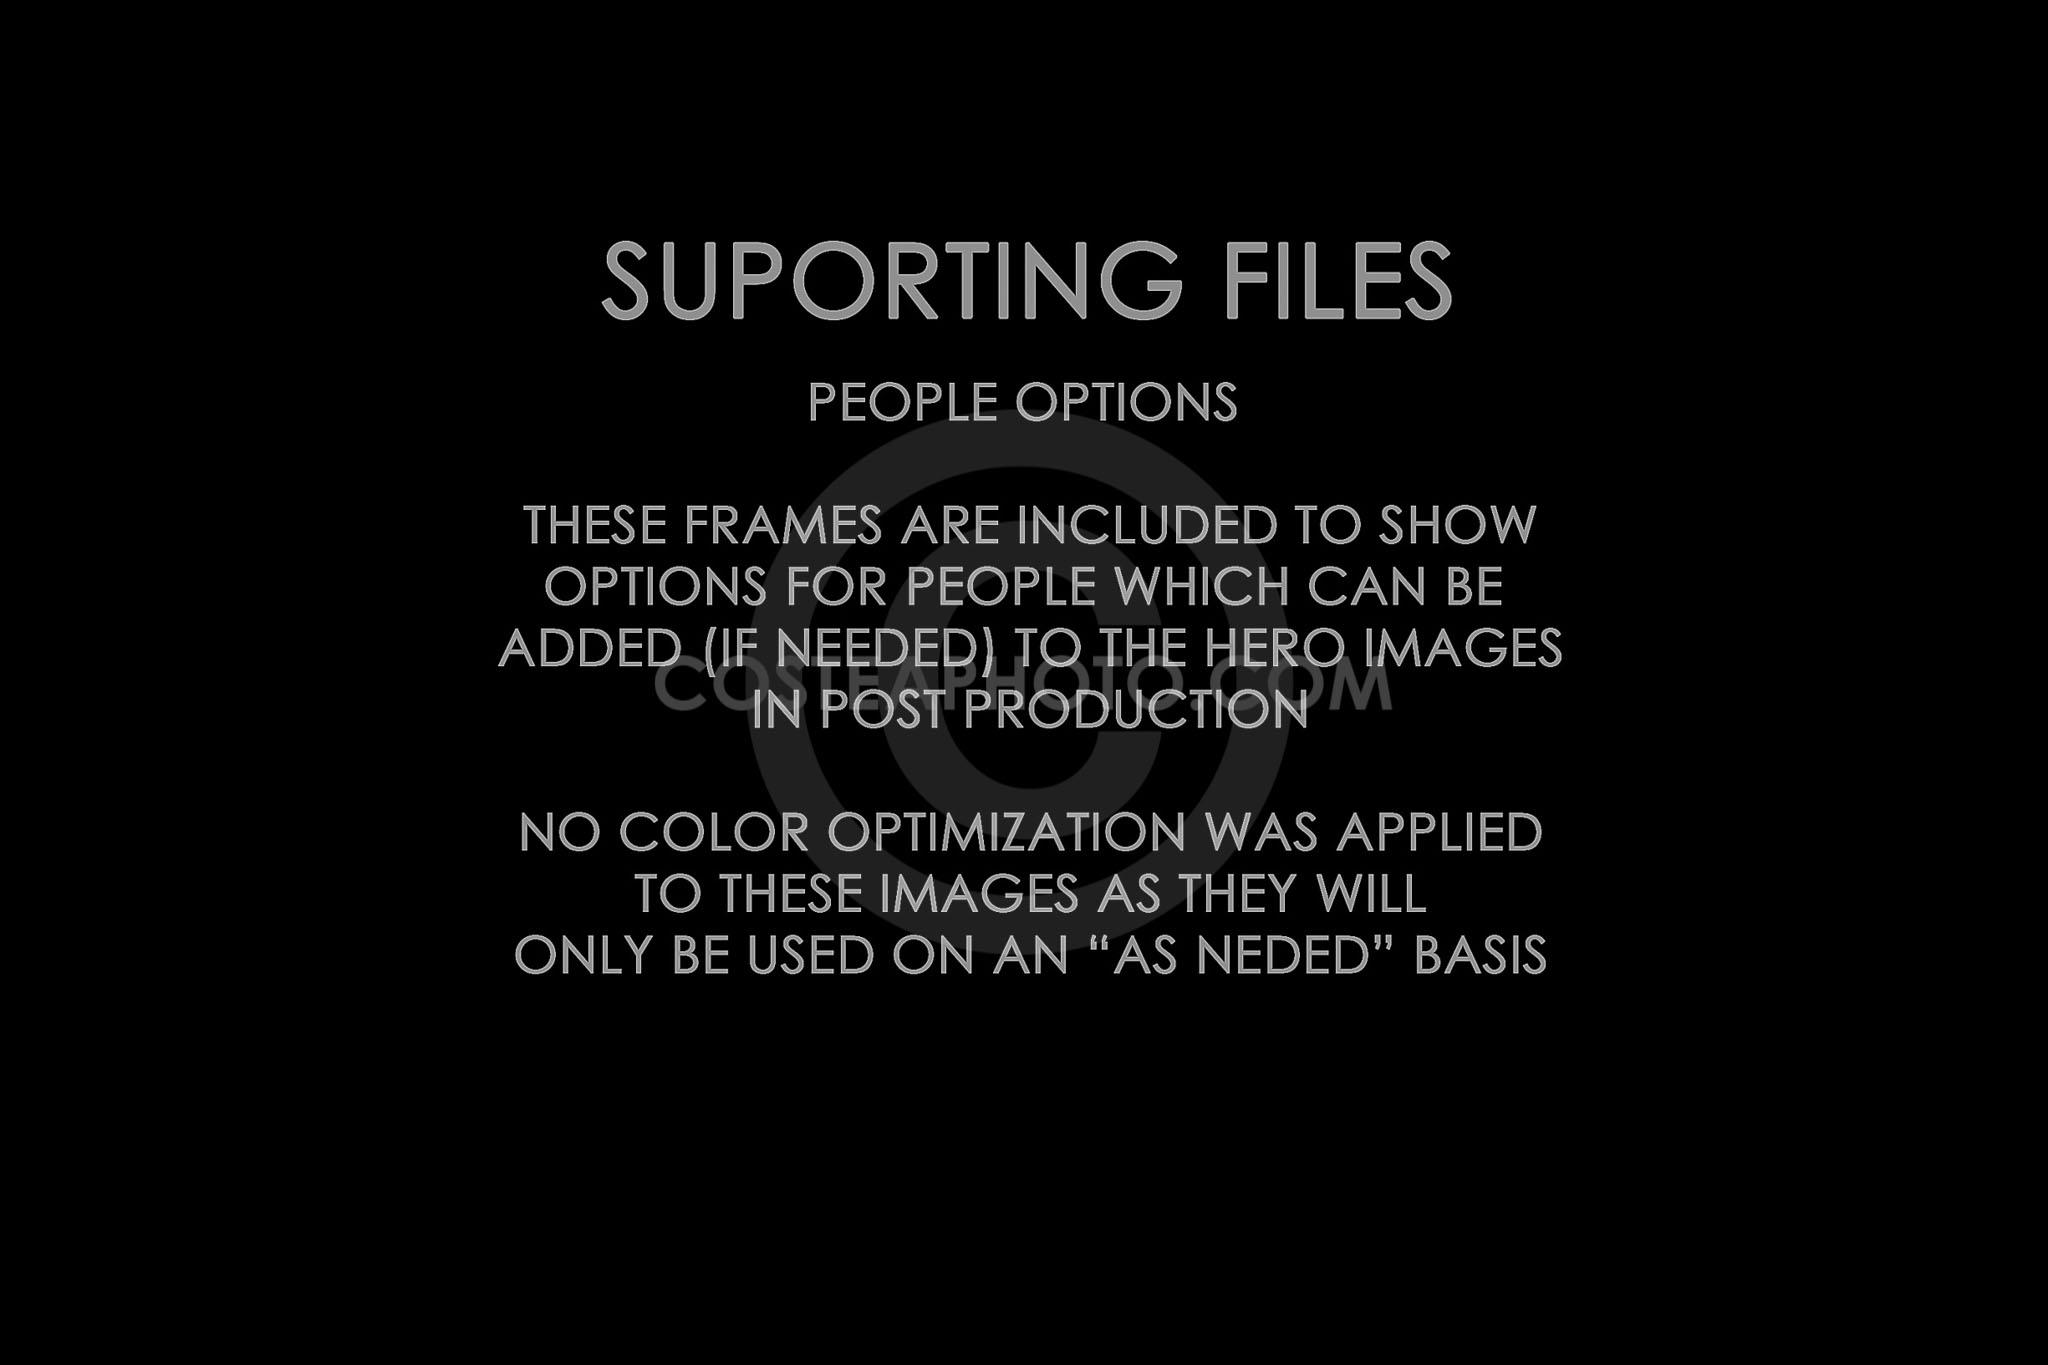 (186) (186) SUPPORTING FILES